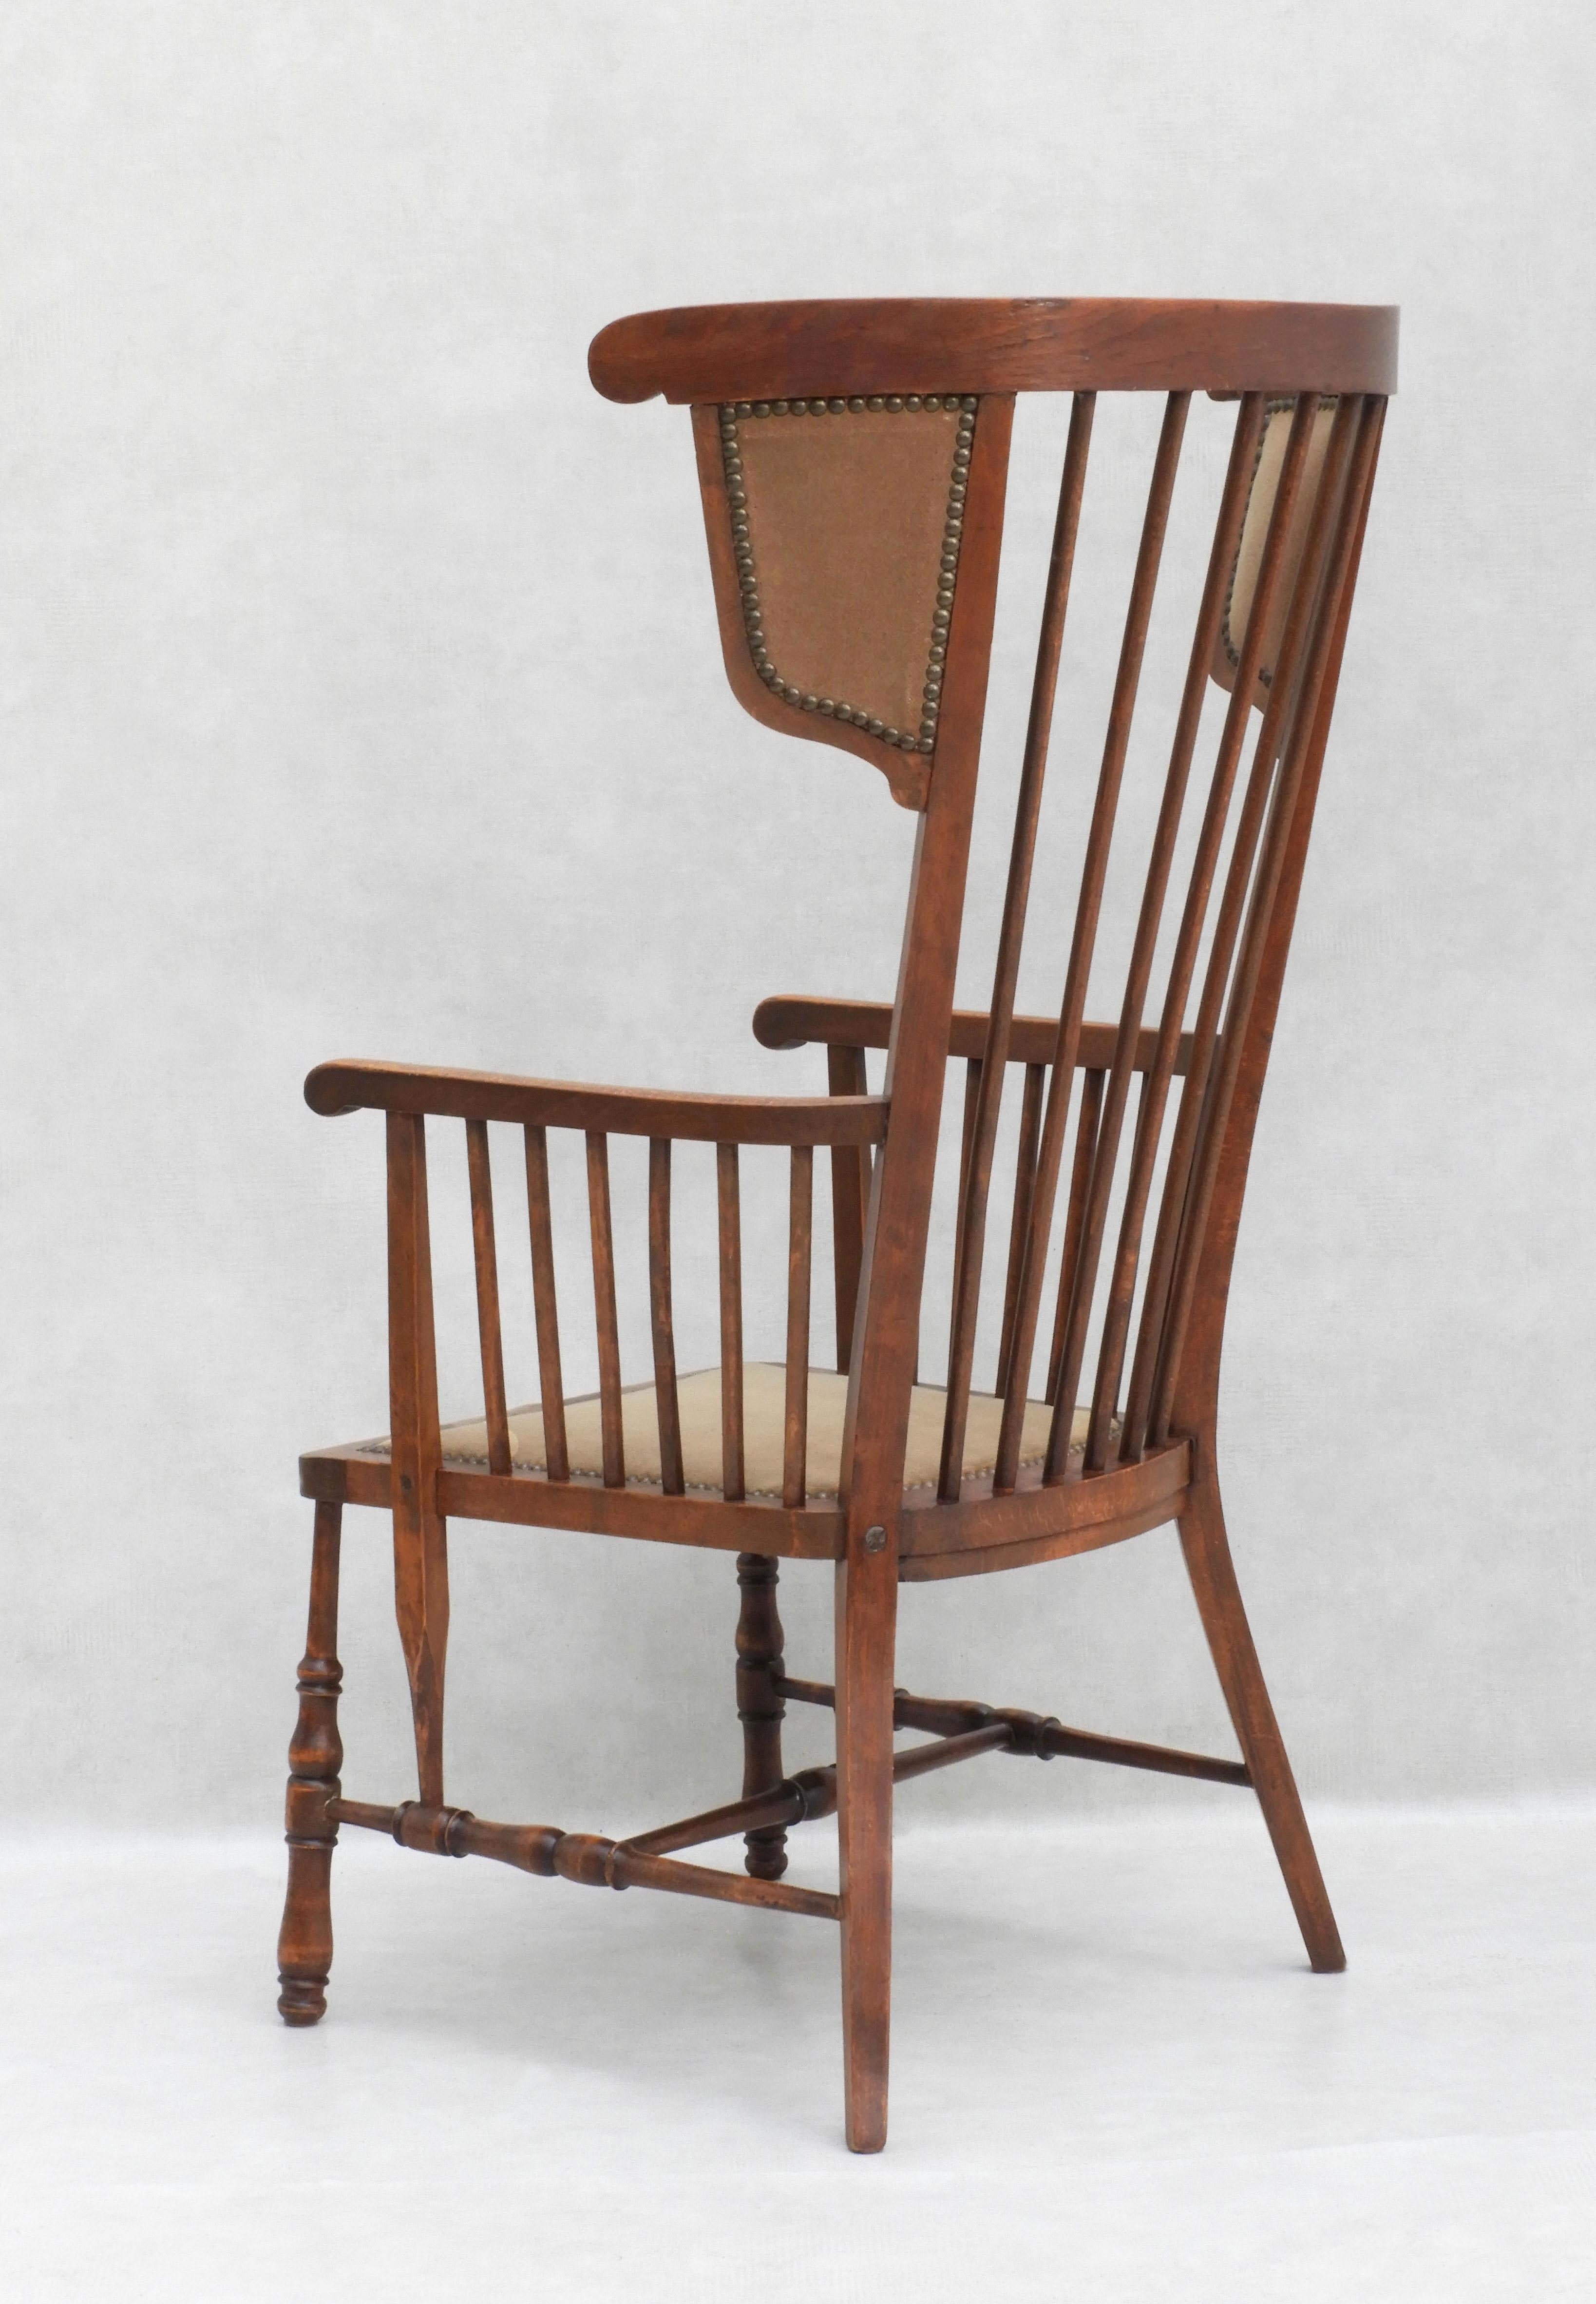 Rare French Arts and Crafts High Back Spindle Wood Winged Upholstered Armchair  For Sale 1